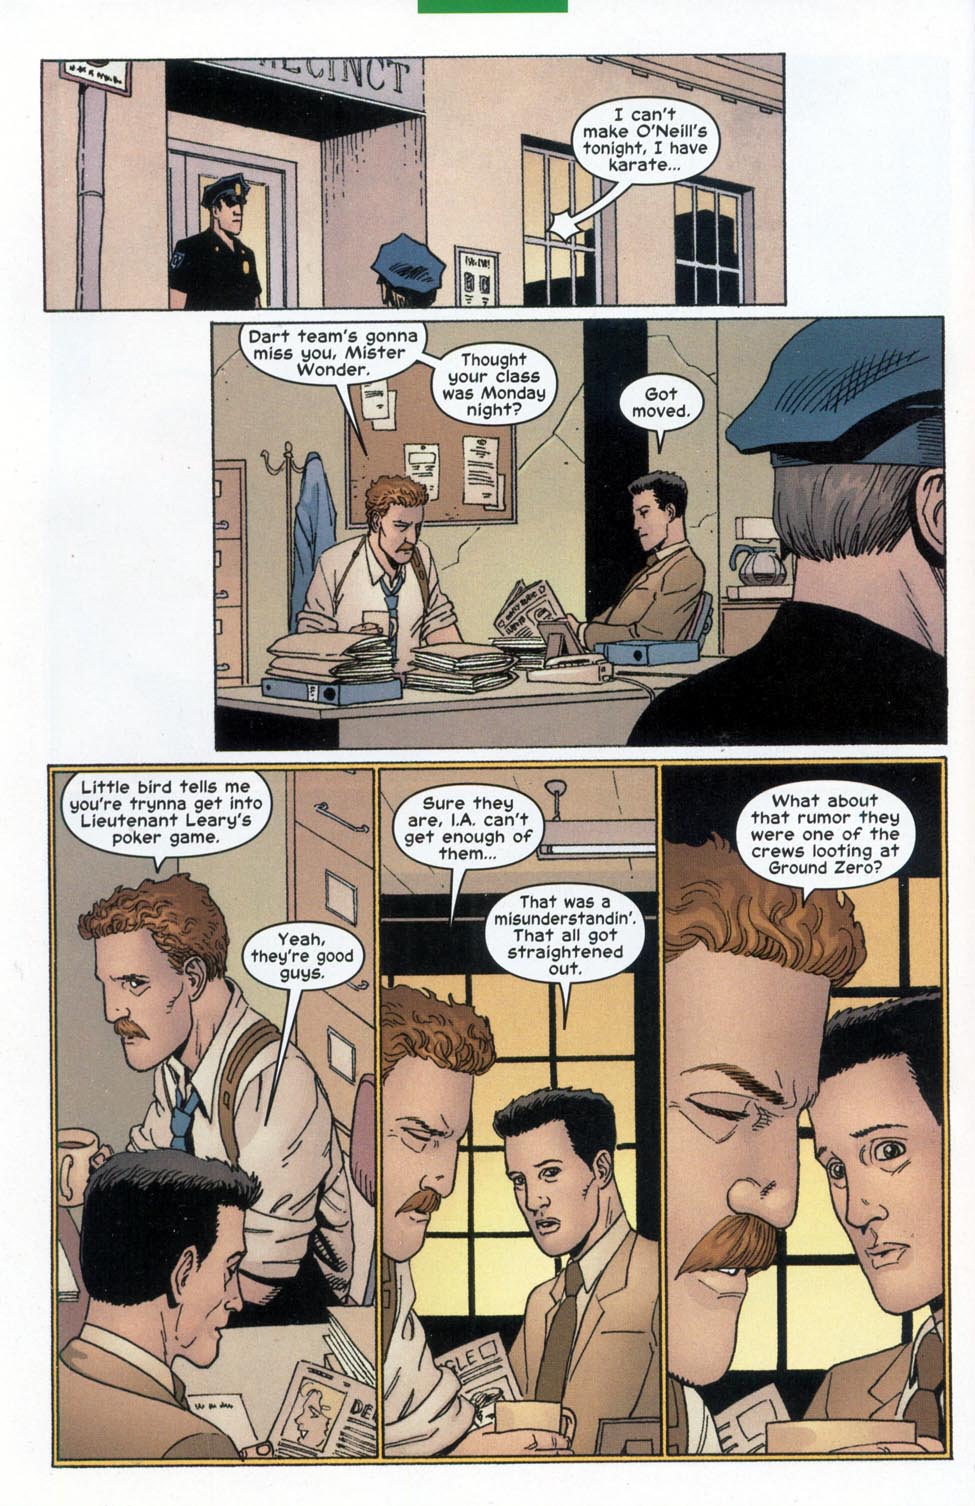 The Punisher (2001) issue 20 - Brotherhood #01 - Page 5